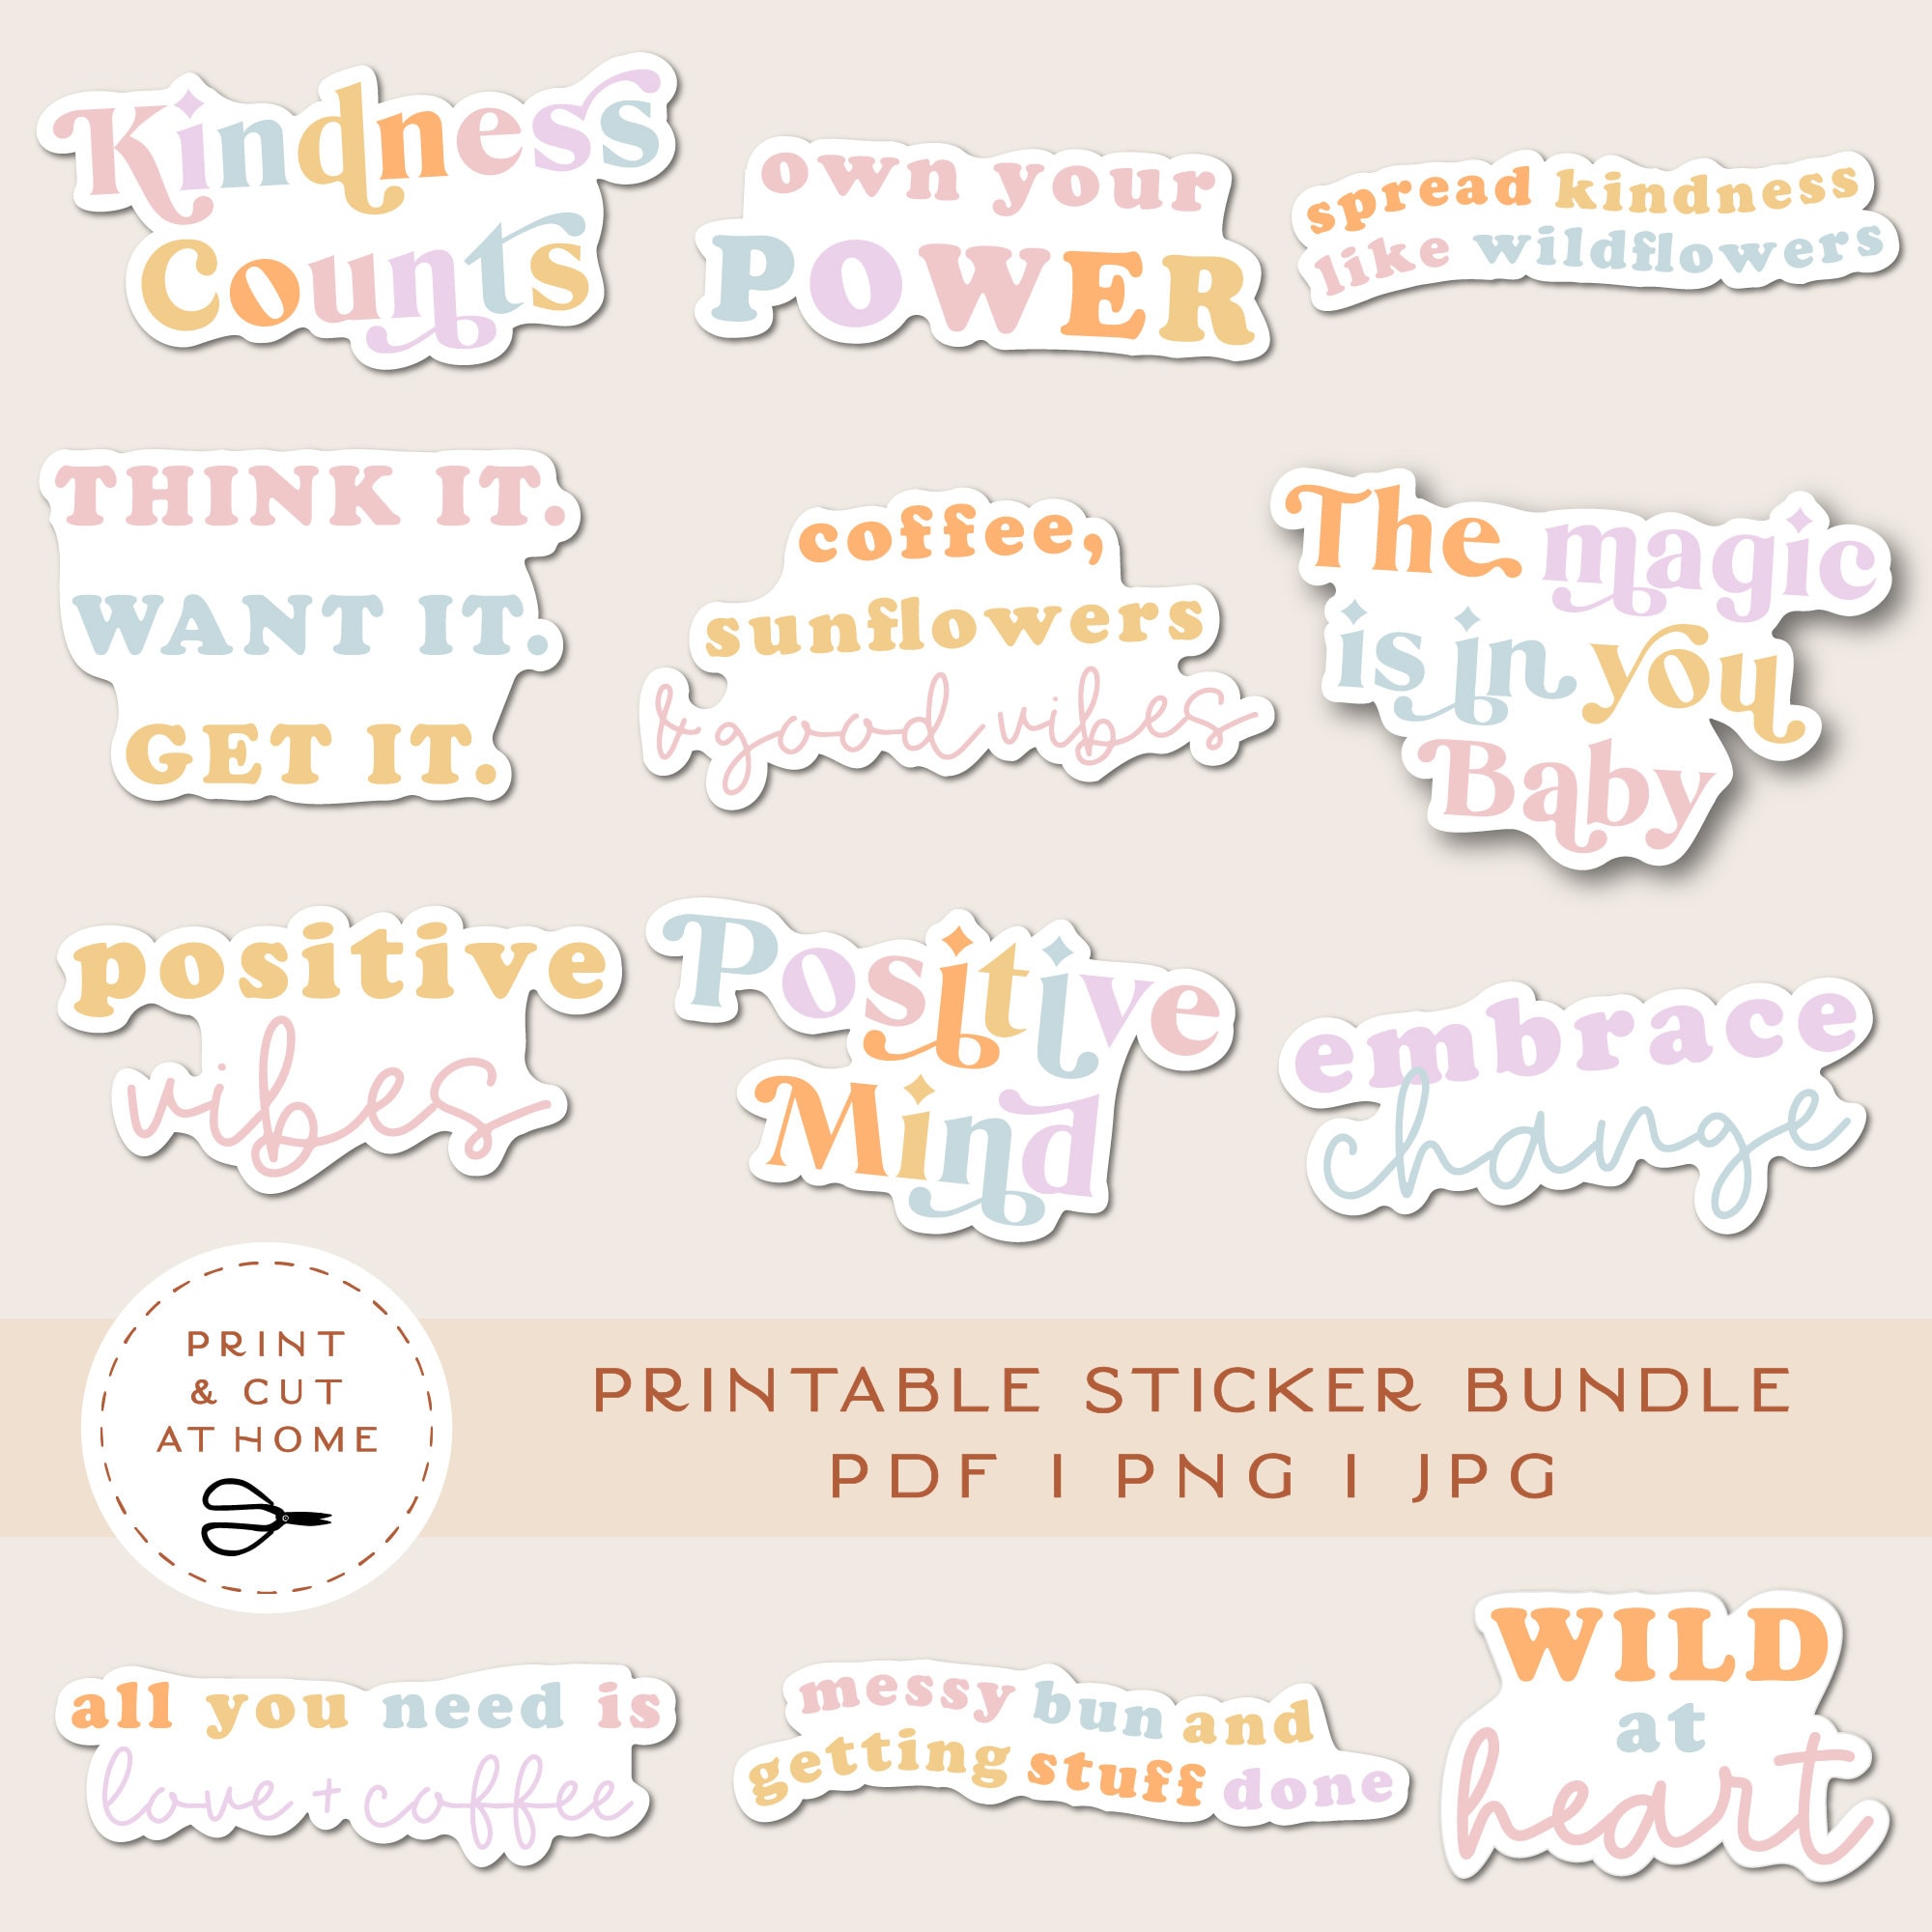 Baby Girl Stickers, New Baby Printable Bullet Journal Stickers, ITS A GIRL  Png for Craft Projects, Scrapbooking 